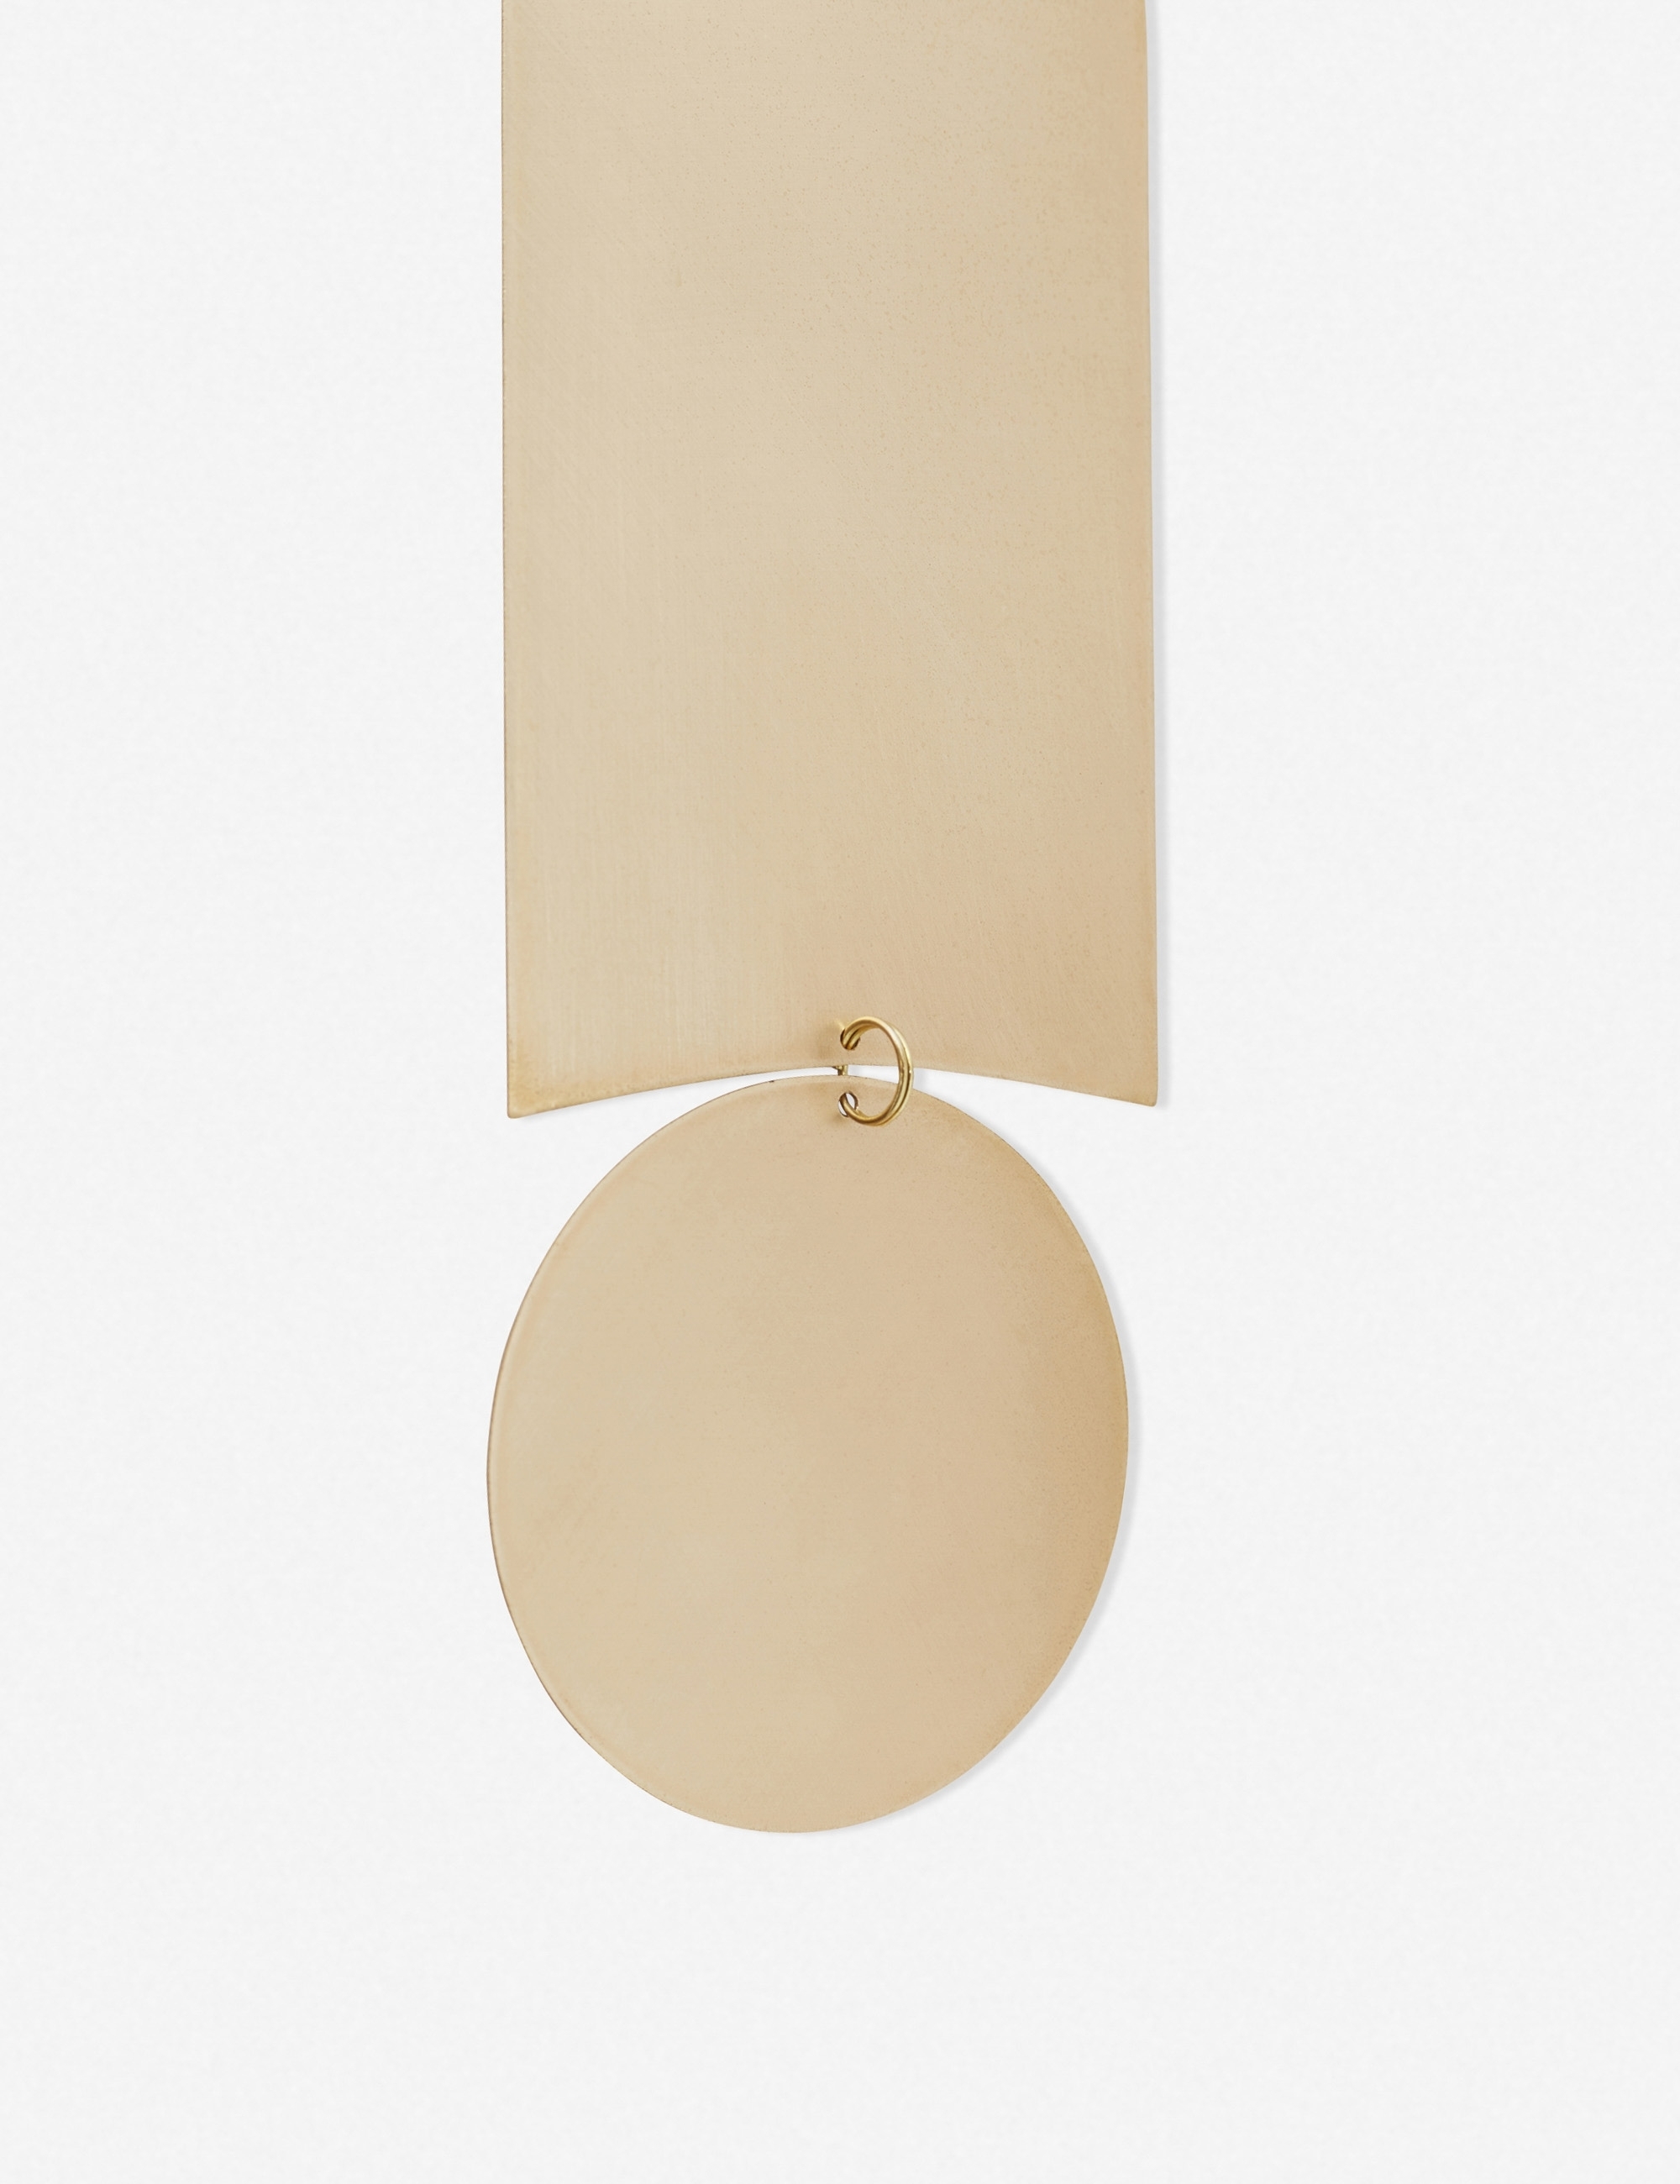 Reflect Wall Hanging by Circle & Line - Image 3